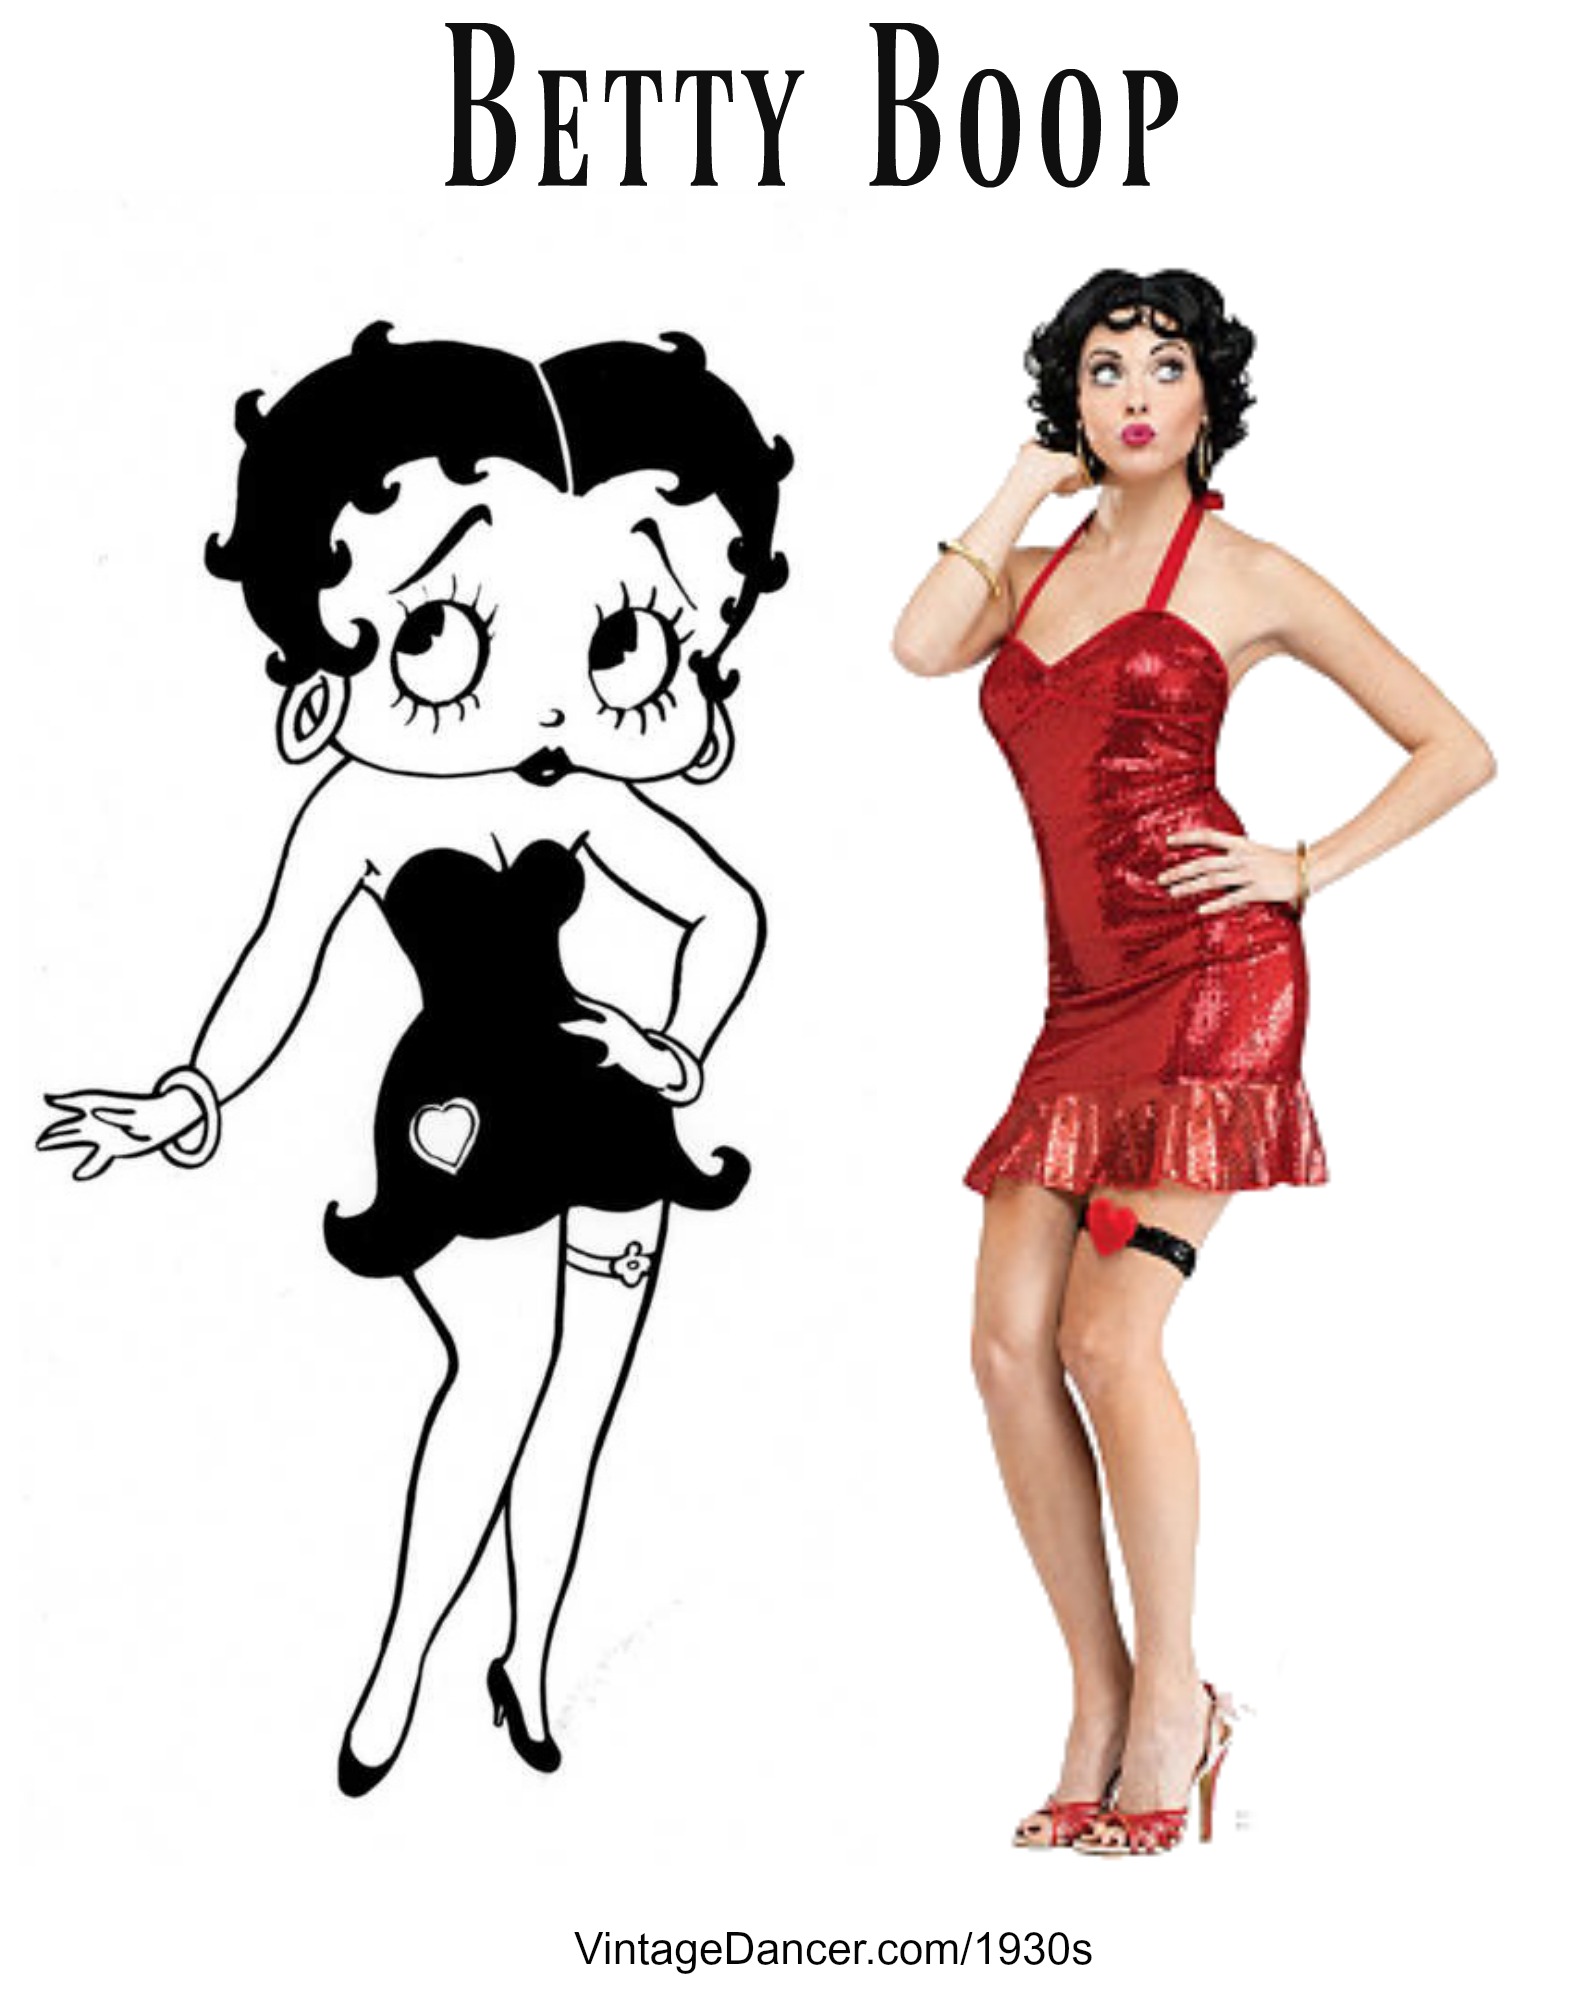 betty boop original outfit